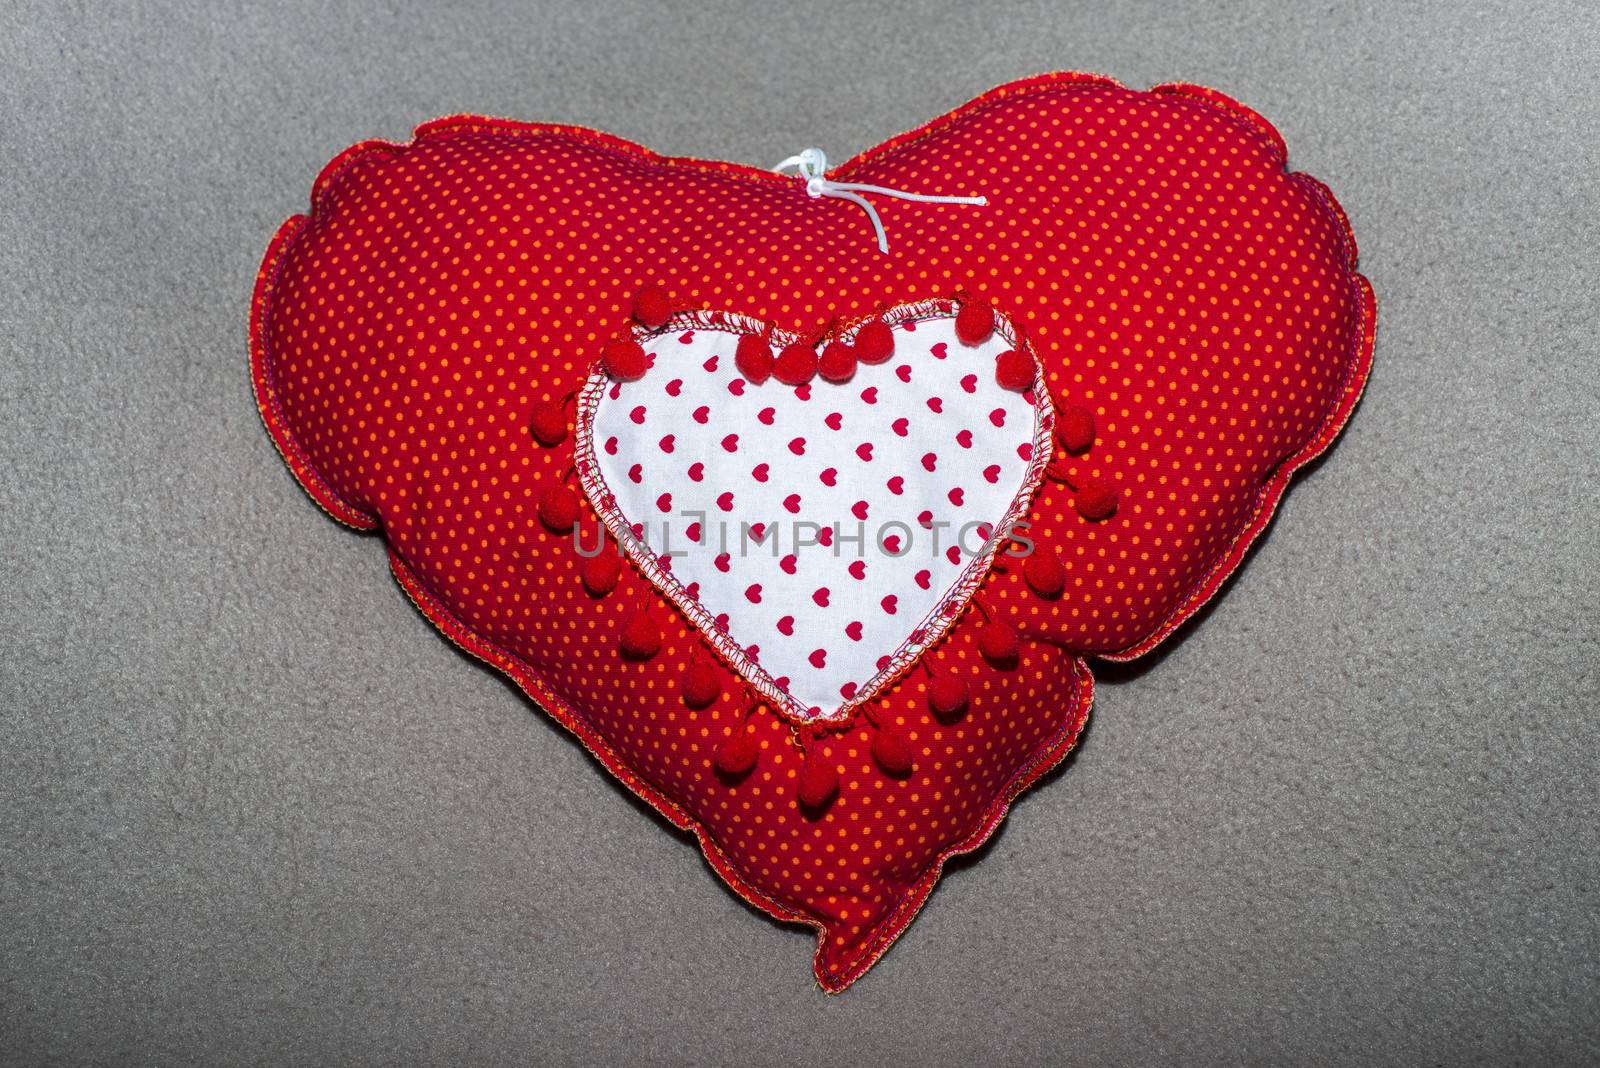 hand made hart shape  by compuinfoto